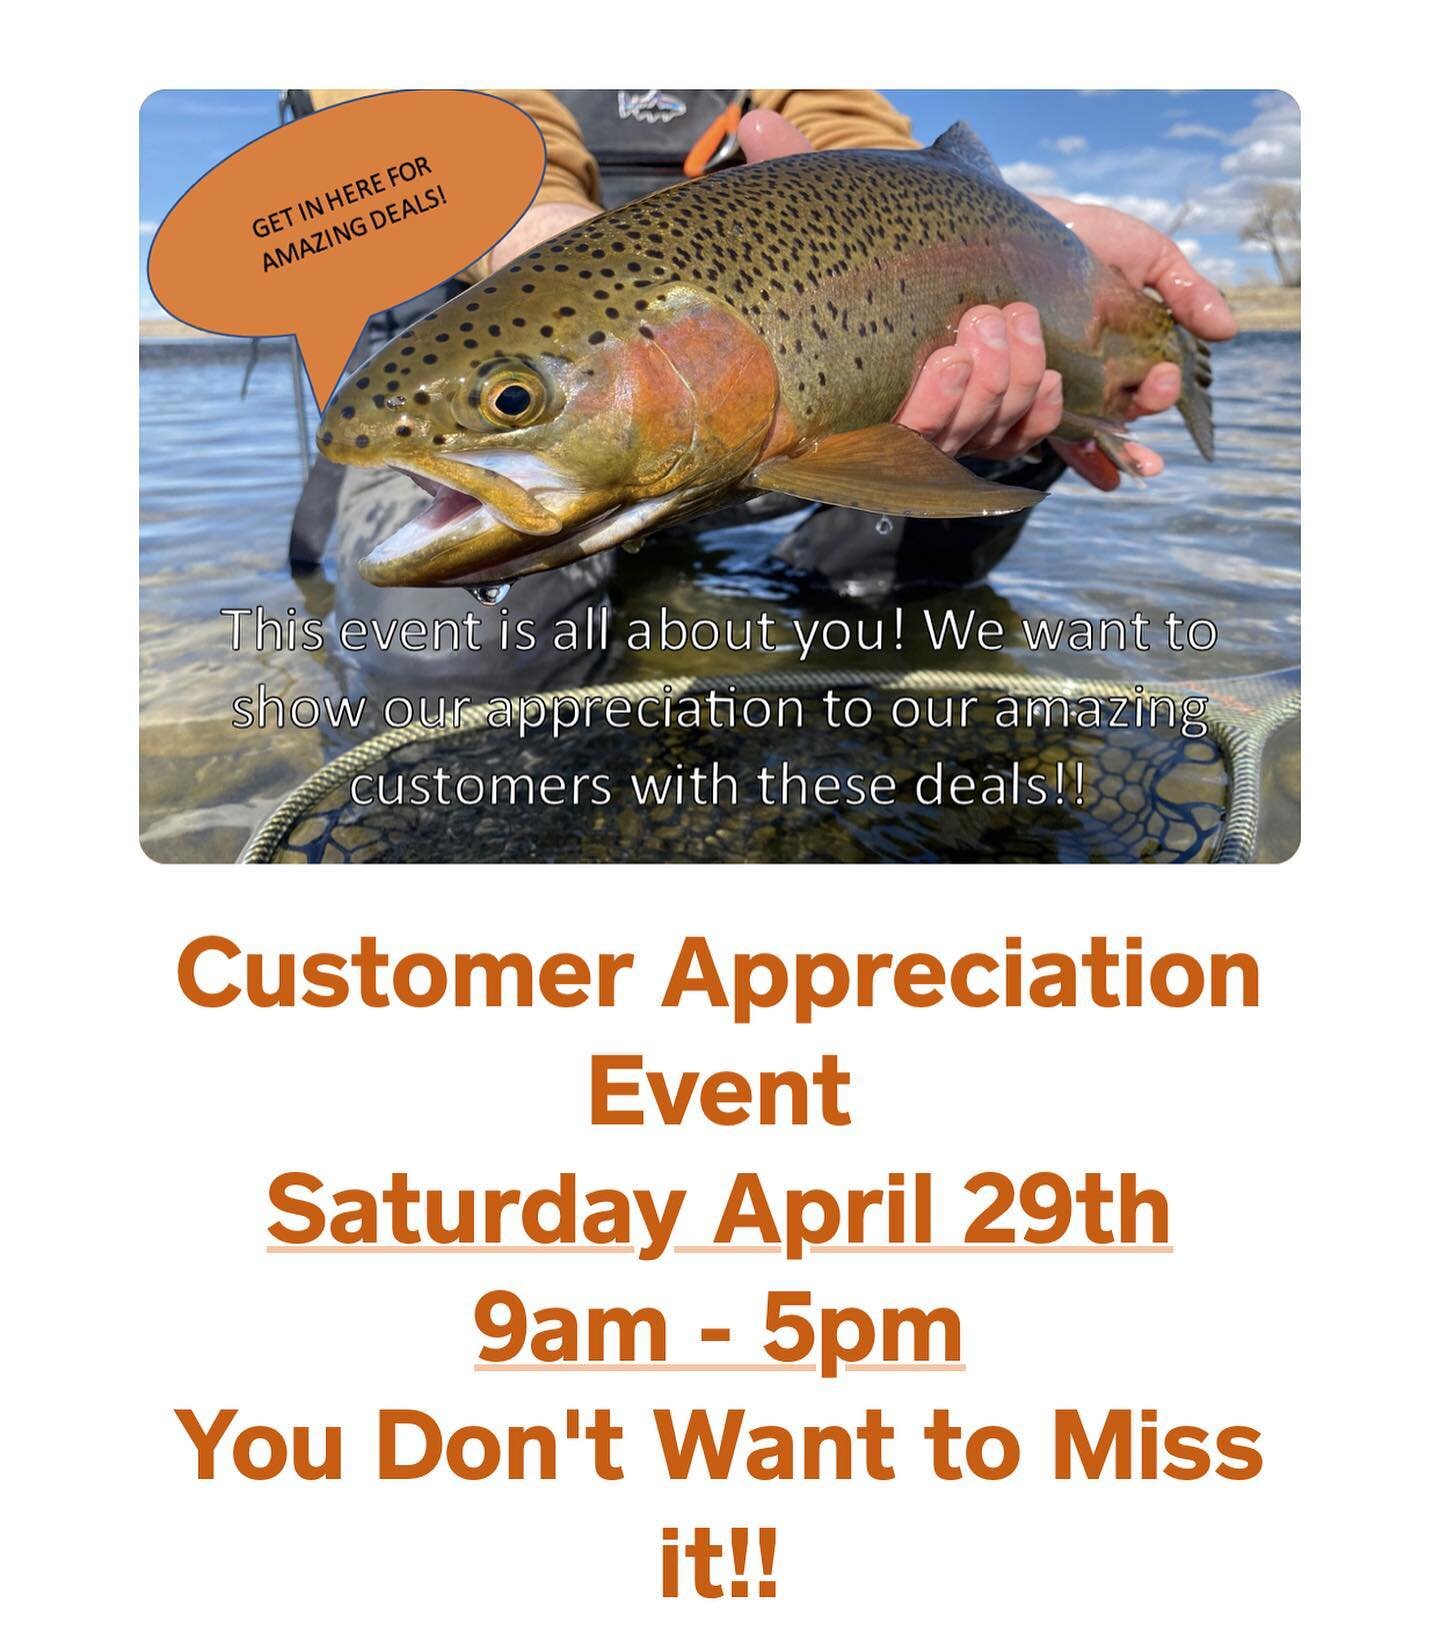 Can&rsquo;t wait to see you all this Saturday!!
-
&bull; 20% OFF all flies
&bull; Buy a full price rod and reel to receive a free line
&bull; For every $100 spent on non-sale items get $10
on a gift card.
&bull; 40% off Umpqua Fly Boxes.
&bull; Buy a